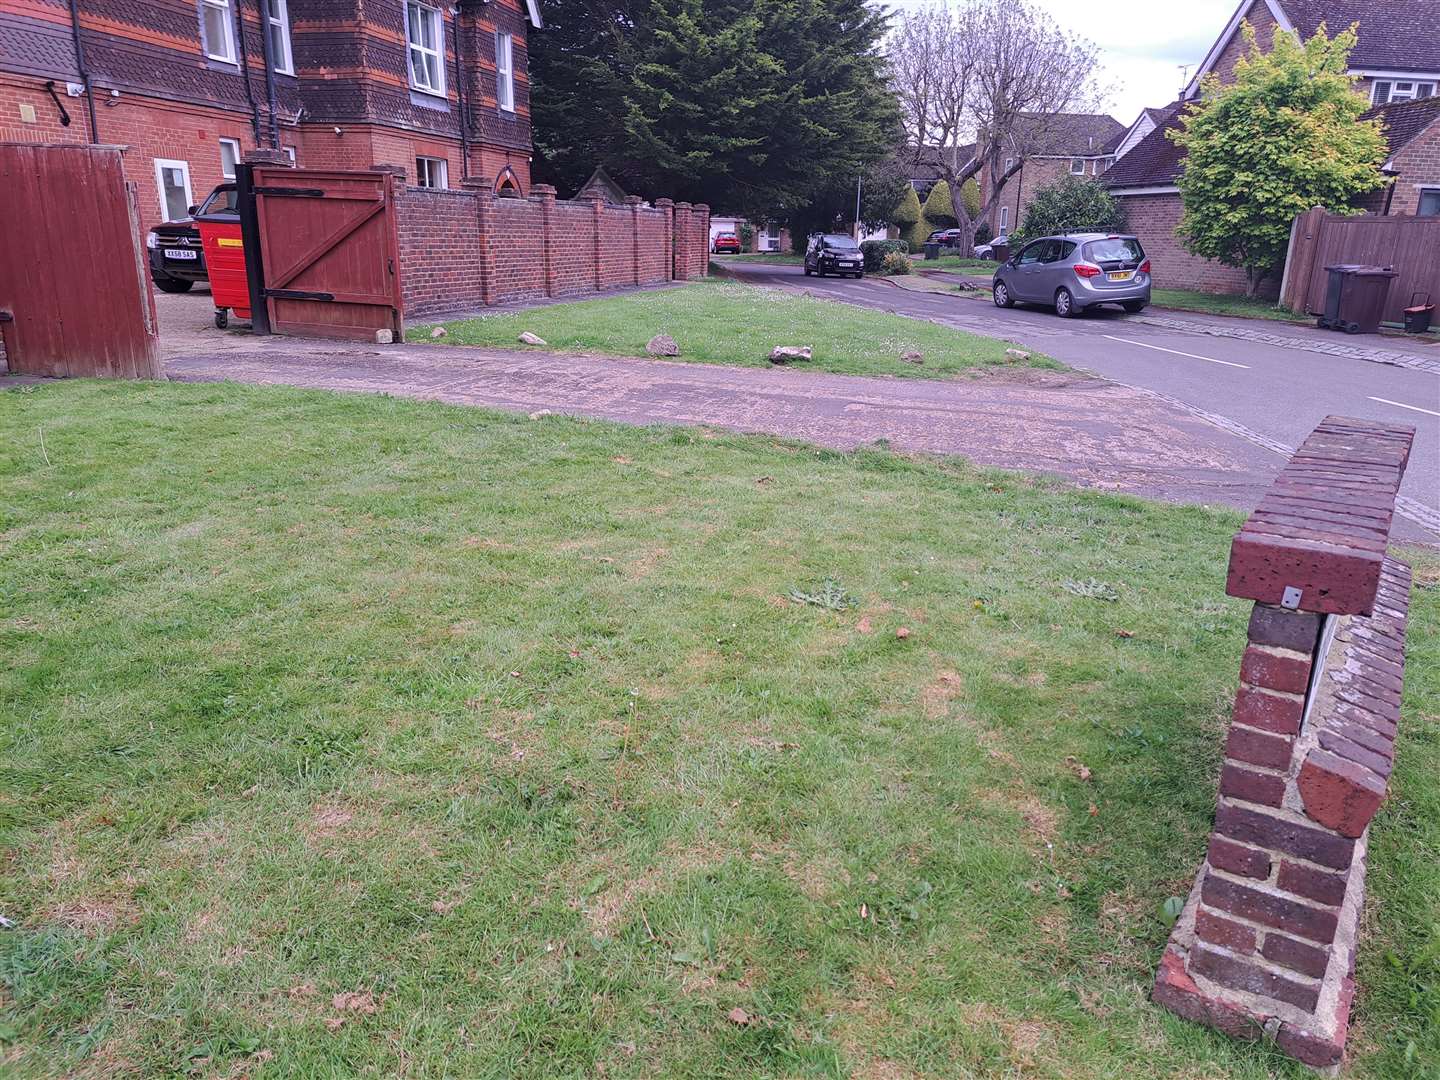 The green verge in front of The Vale will be turned into parking